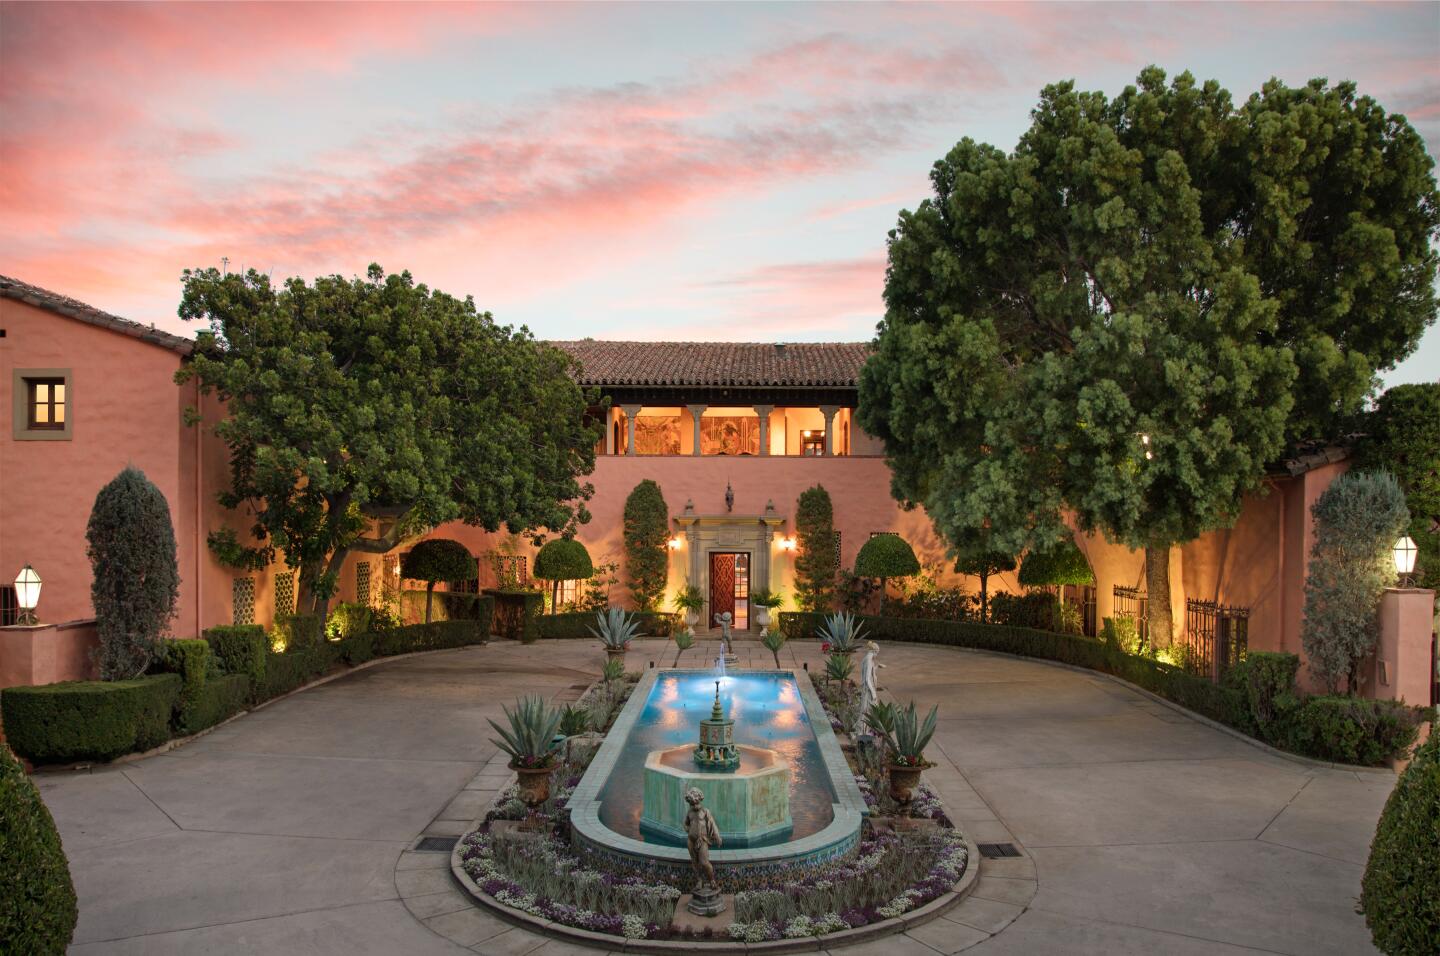 Once owned by magnate William Randolph Hearst, the iconic Mediterranean Revival-style mansion has appeared in the films "The Godfather" and "The Bodyguard."